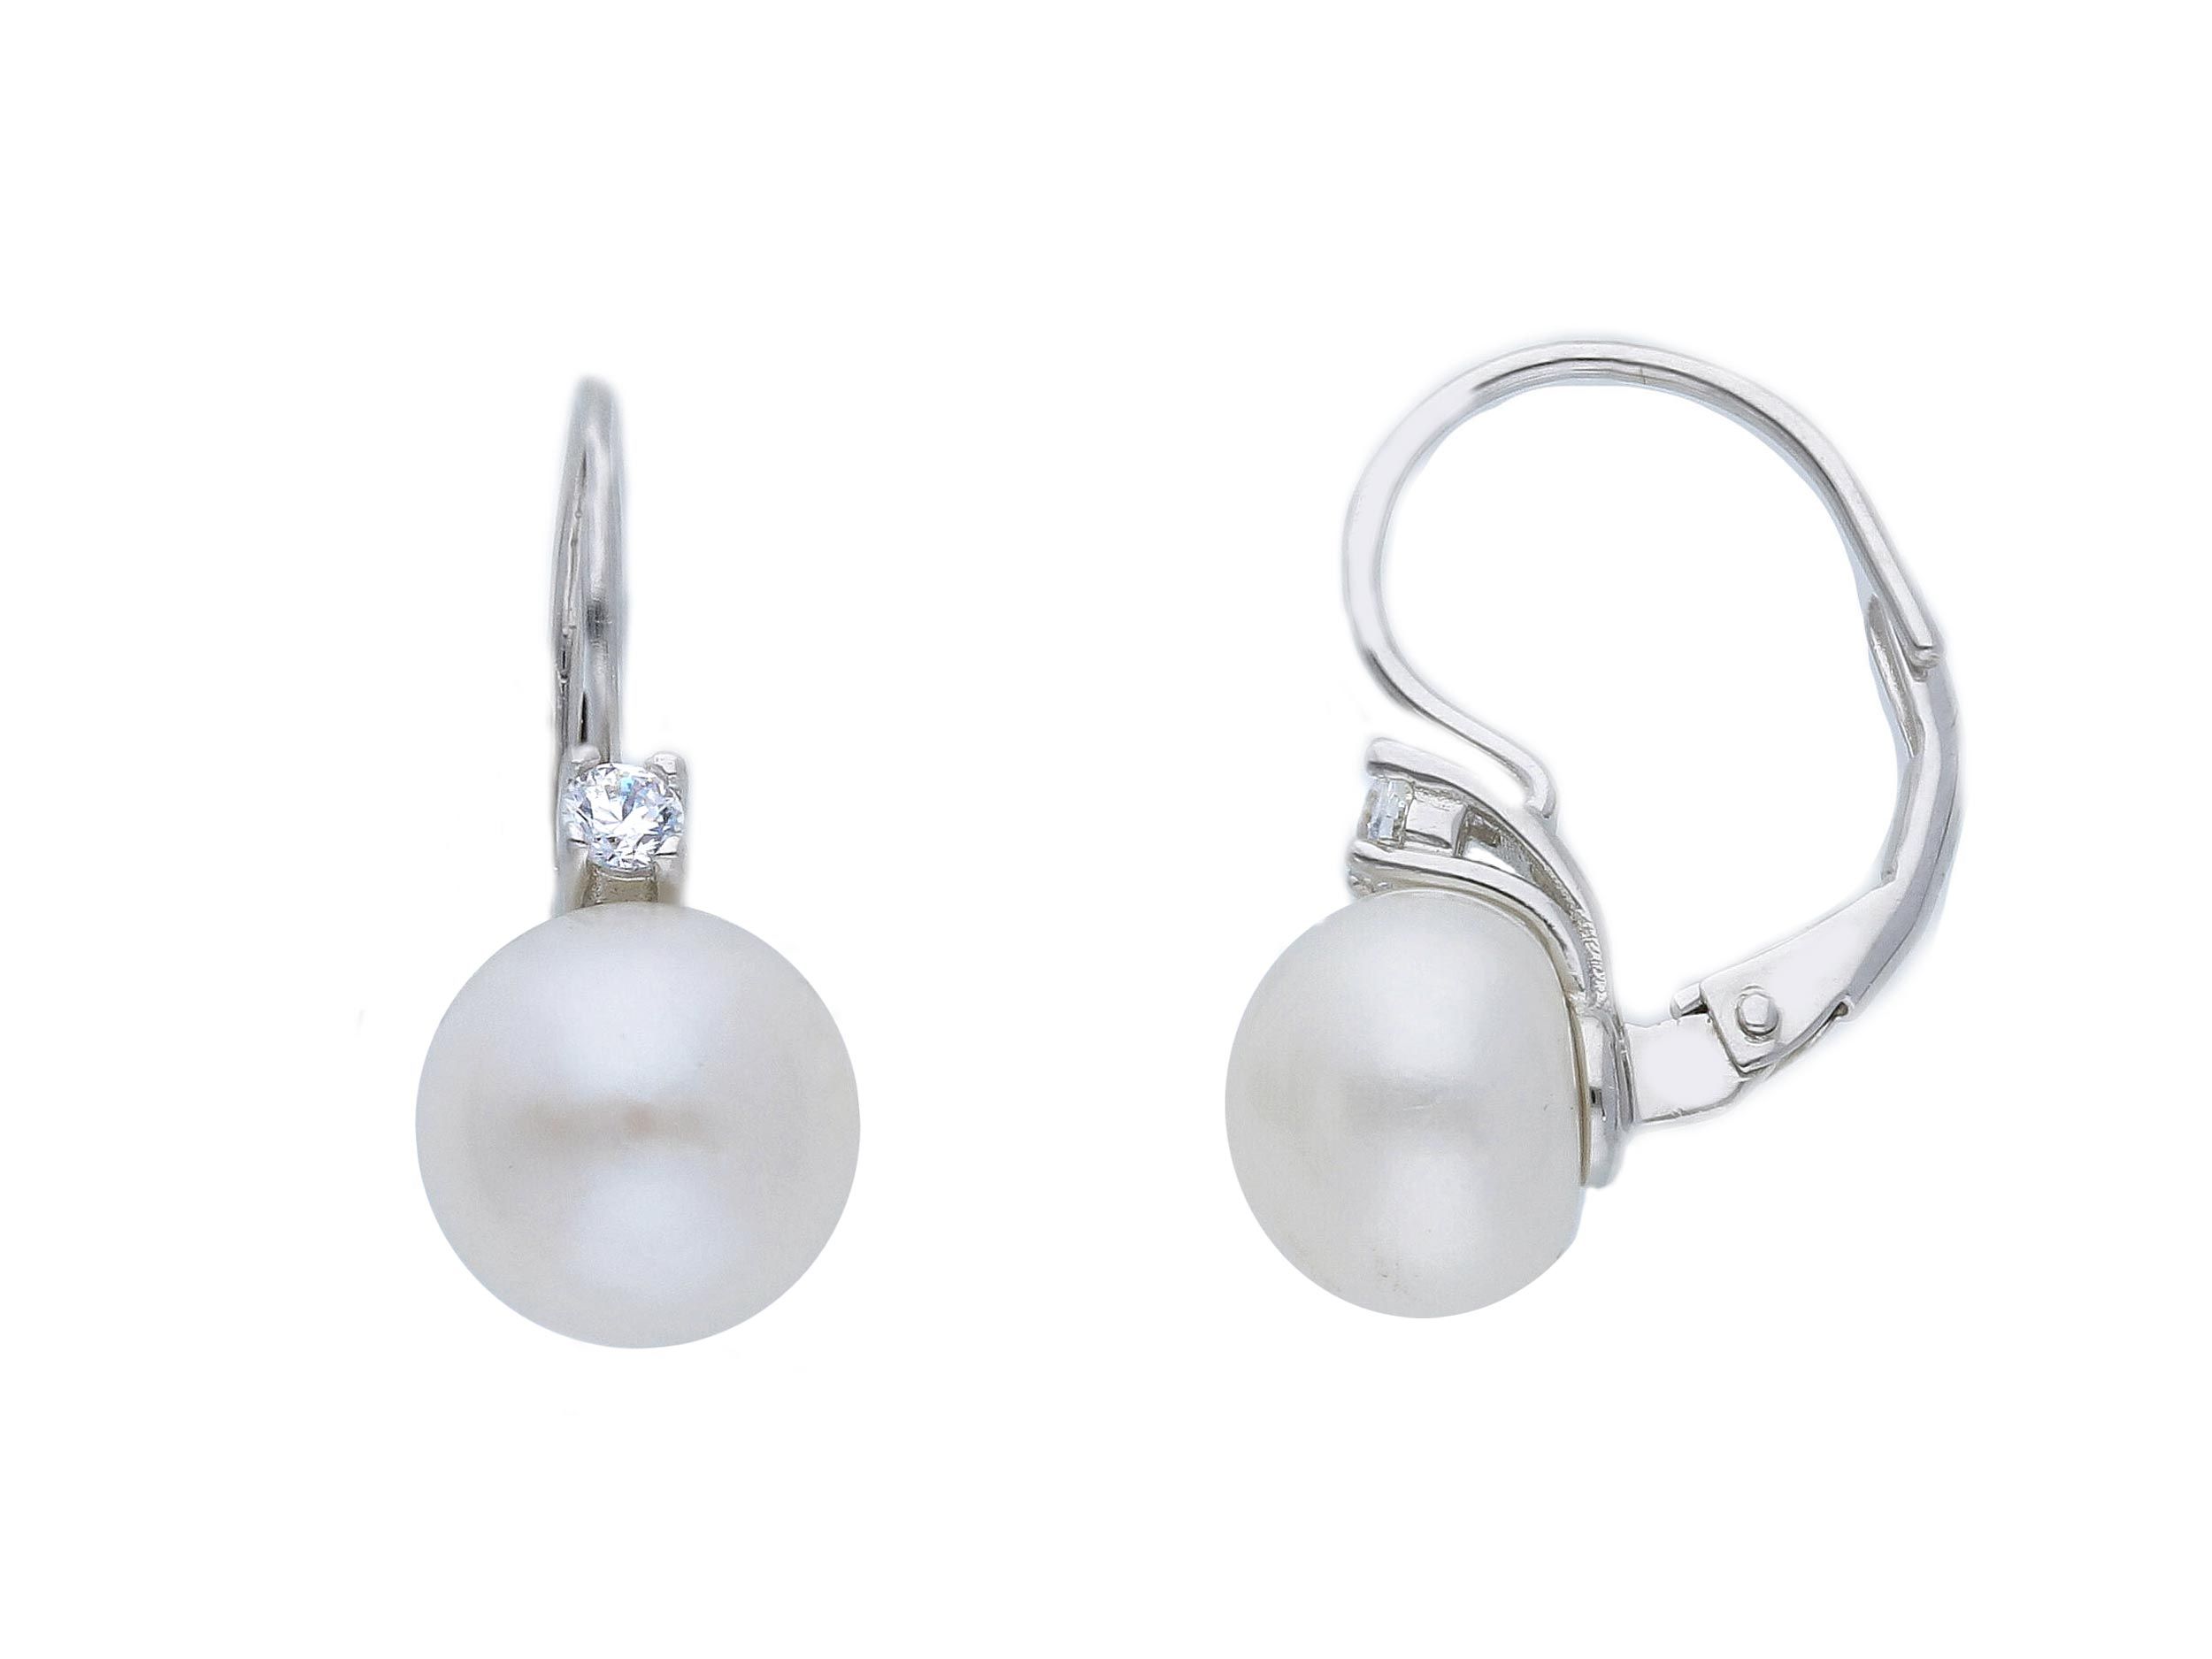  Platinum plated silver 925° earrings wiith pearls (code S231026)